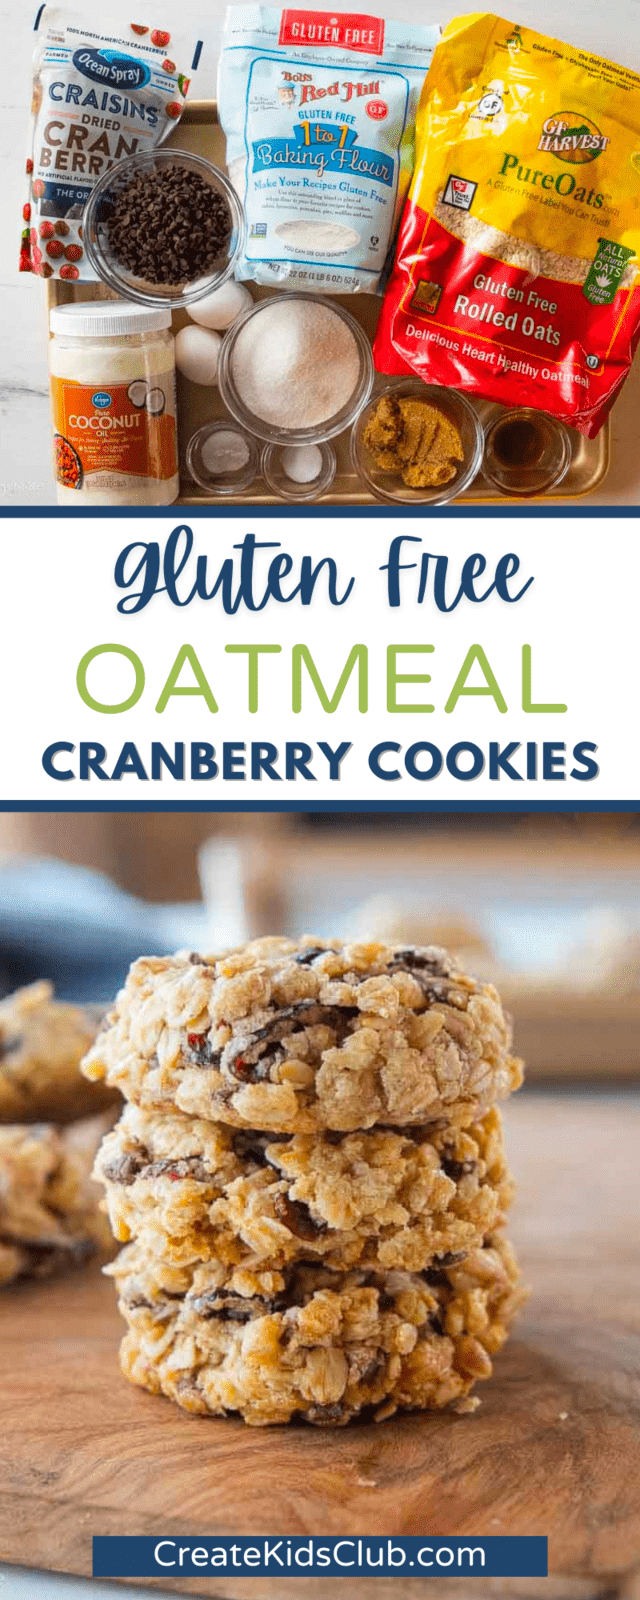 two Pinterest images of gluten free oatmeal cranberry cookies